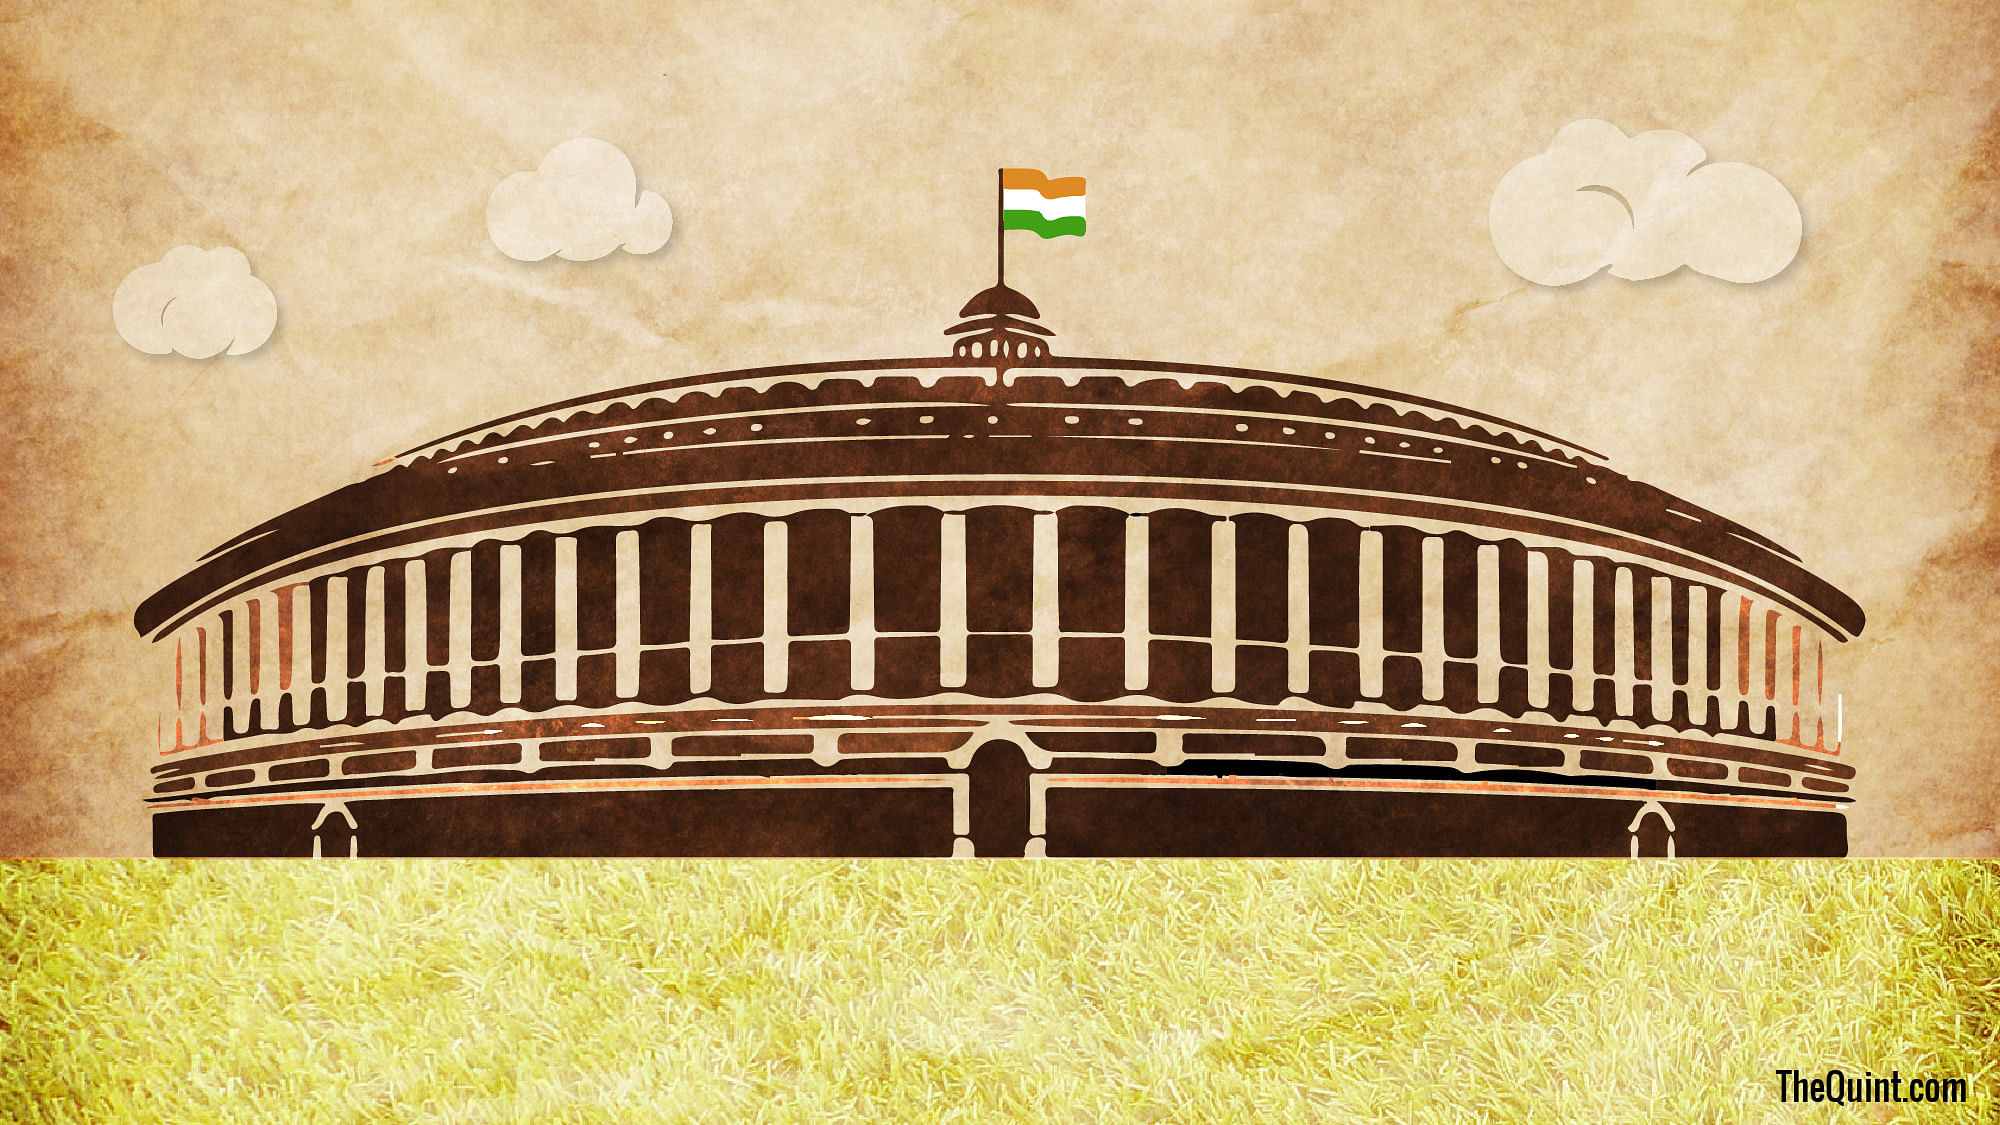 

Revamping the structure of the Rajya Sabha will ensure it provides checks and balances in parliamentary democracy.